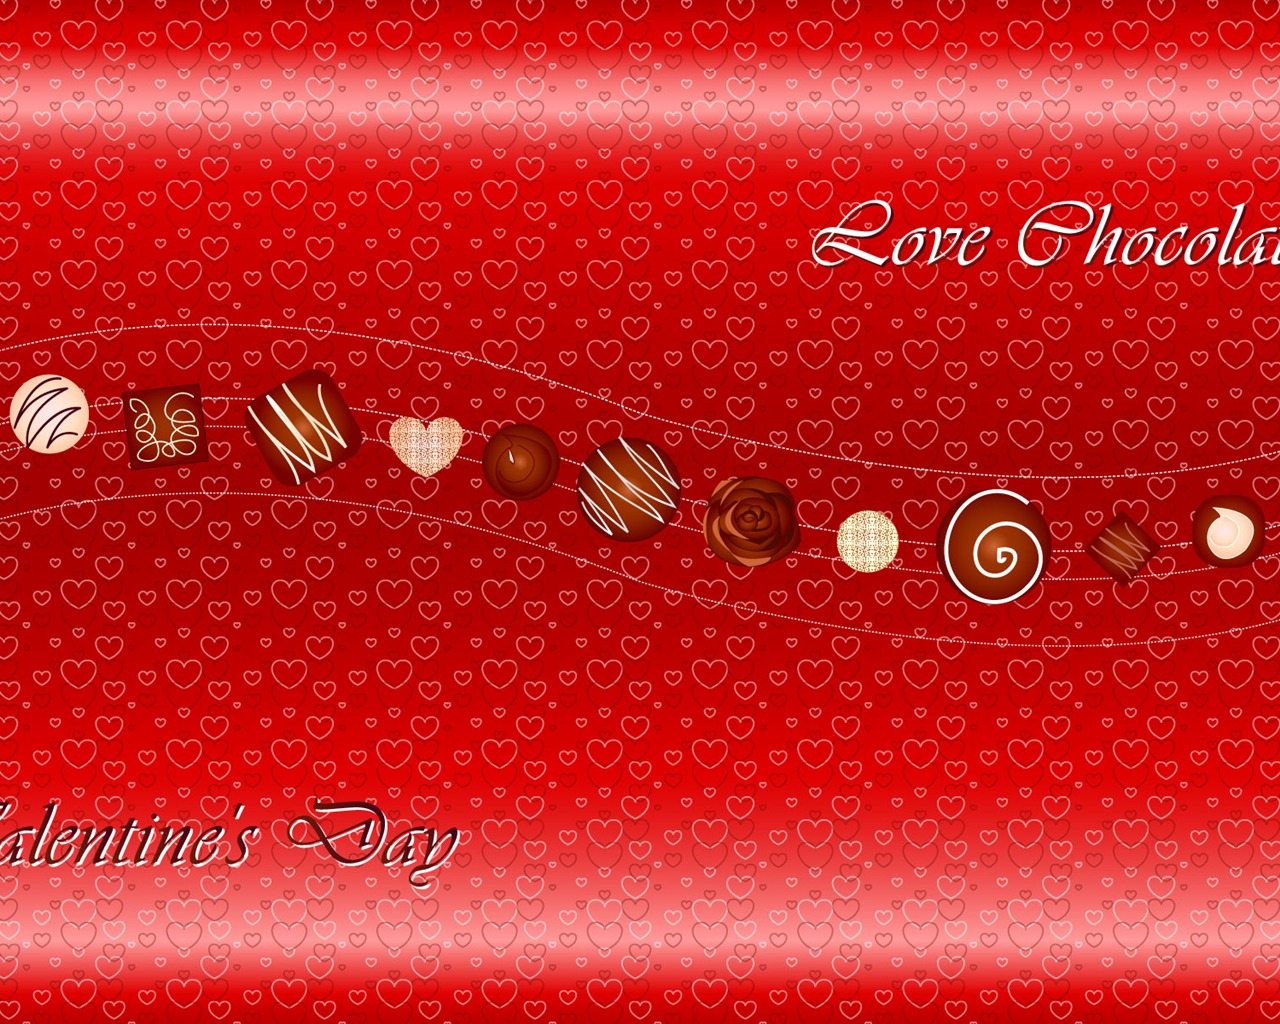 Valentine's Day Theme Wallpapers (1) #2 - 1280x1024